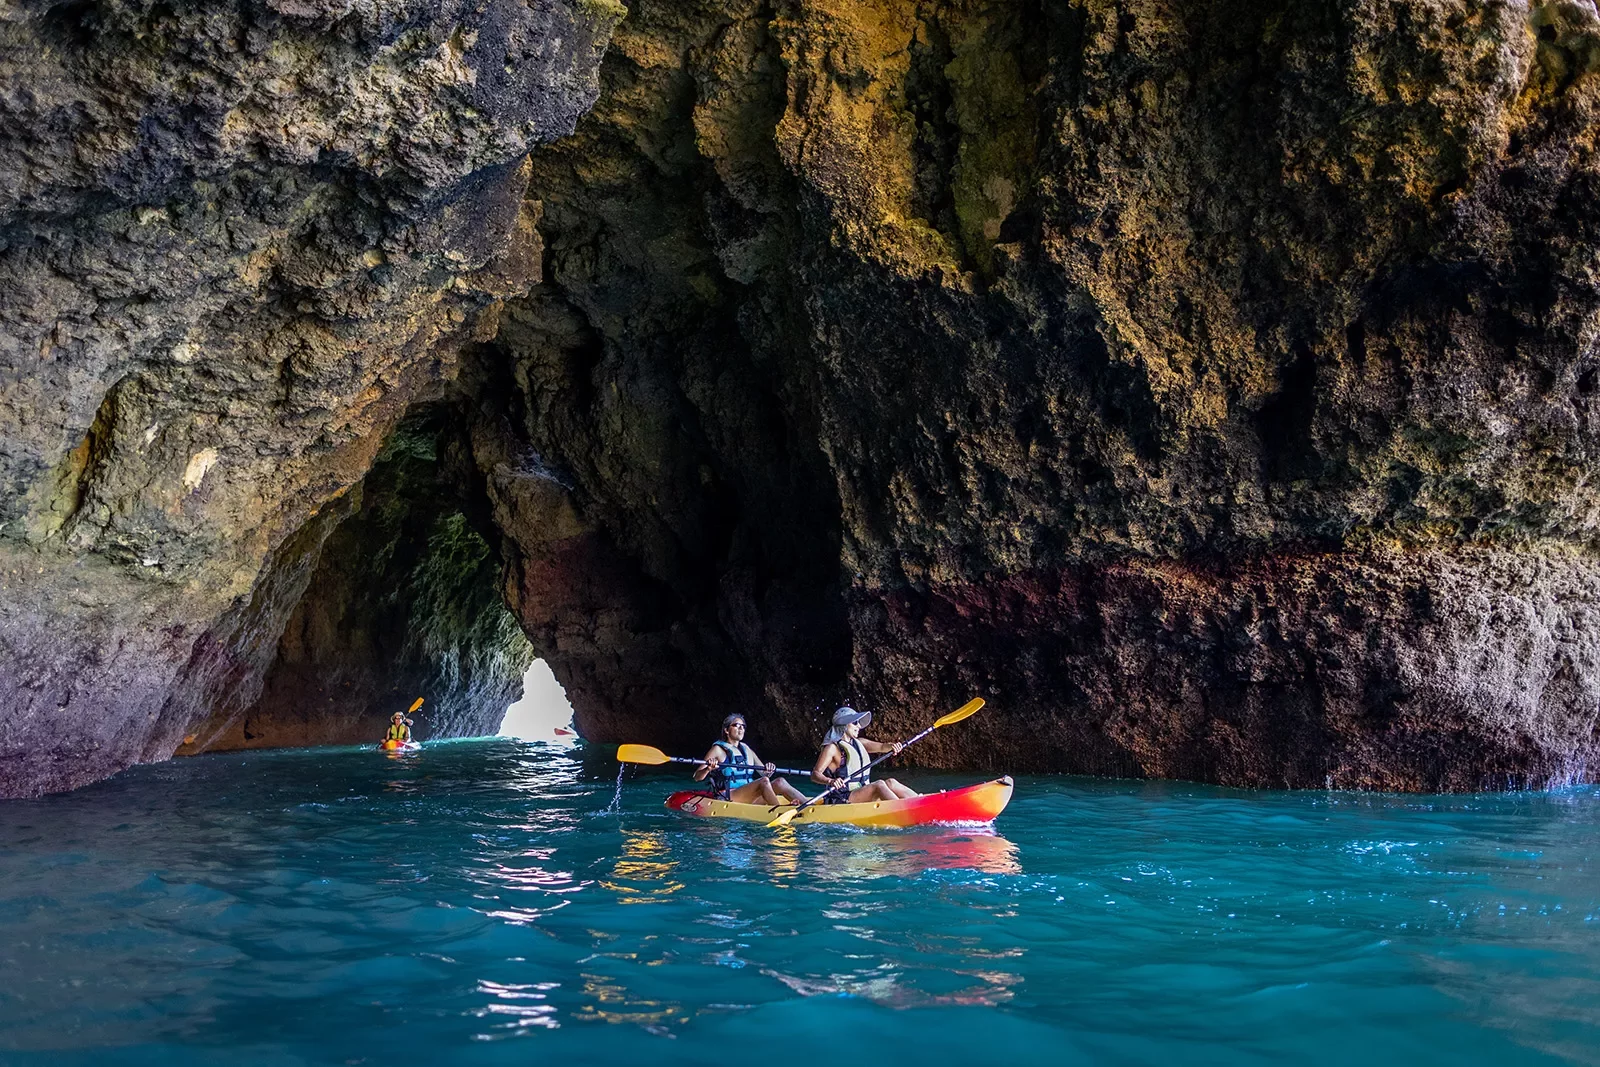 Kayaking through a cave in Portugal